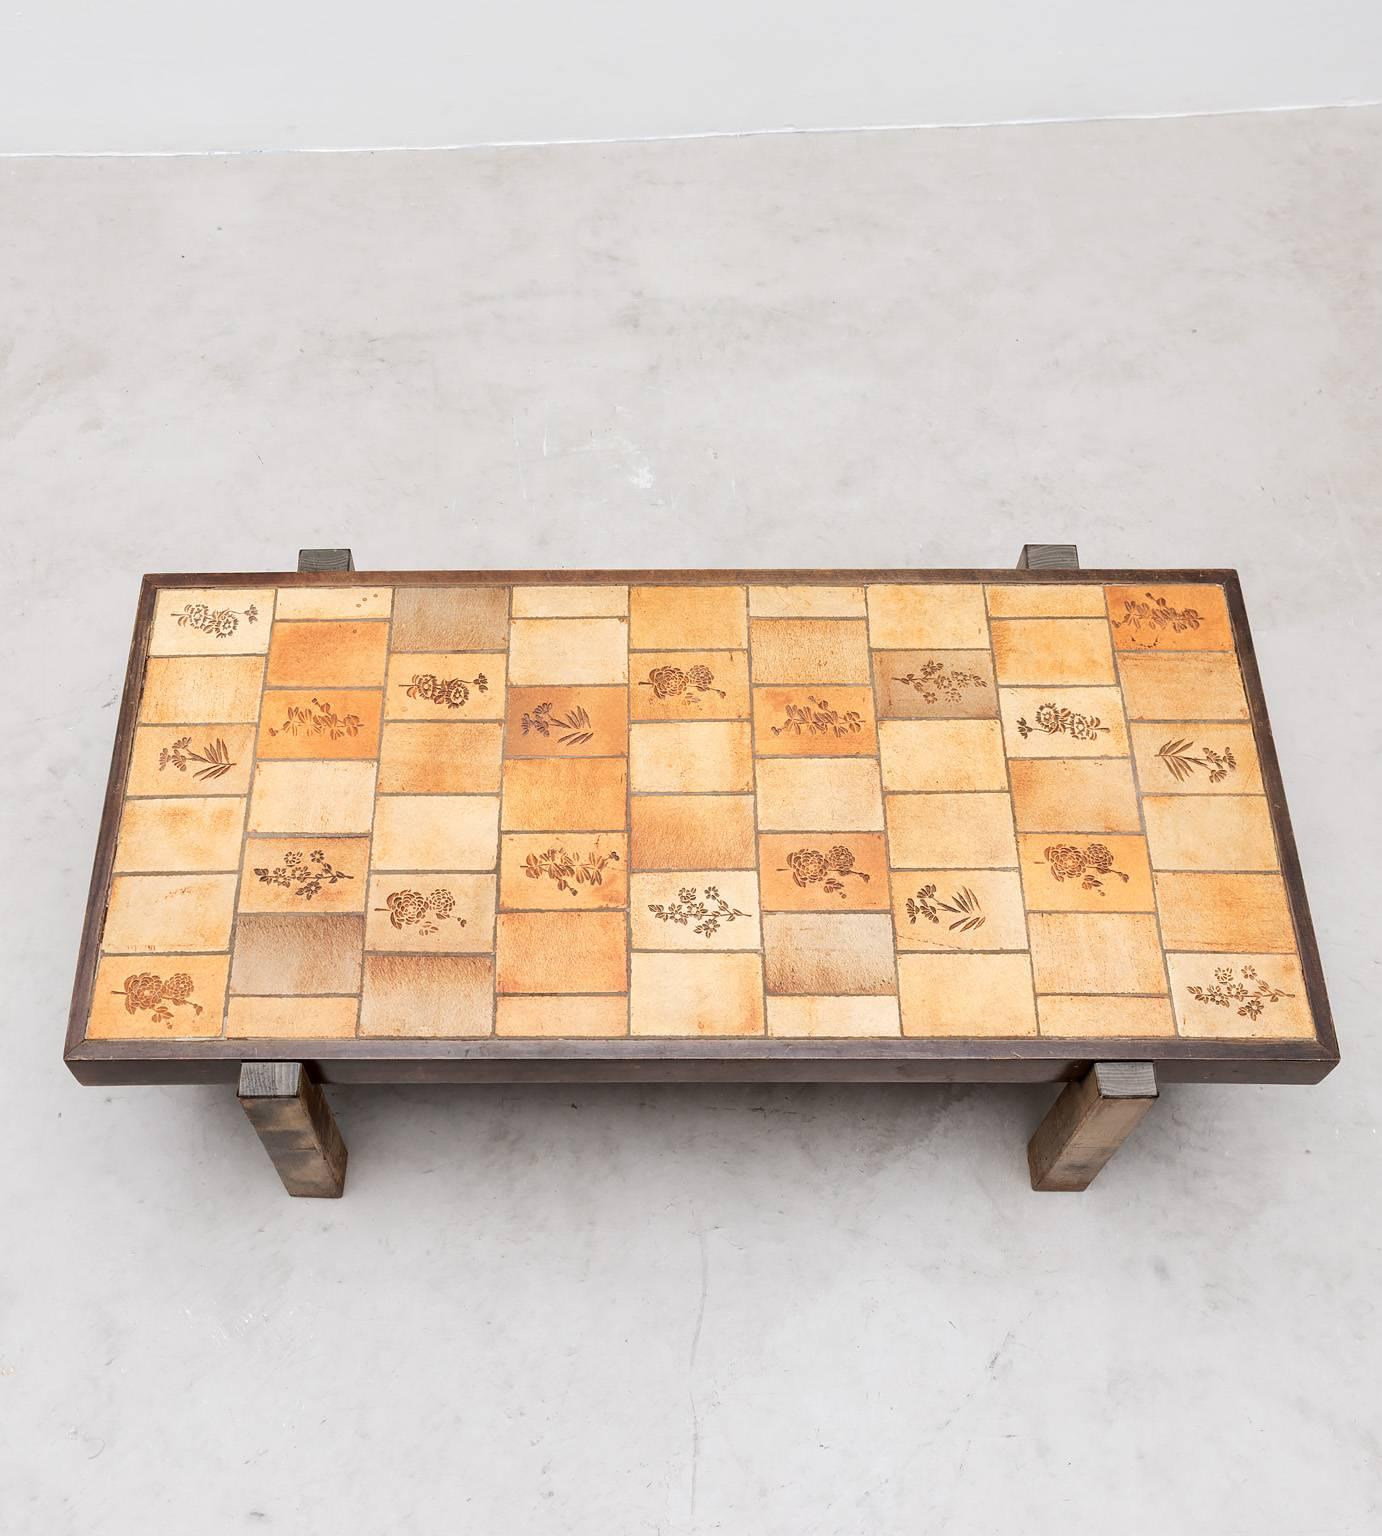 Modern Roger Capron Coffee Table with Garrigue Tiles, Vallauris, France 1950s